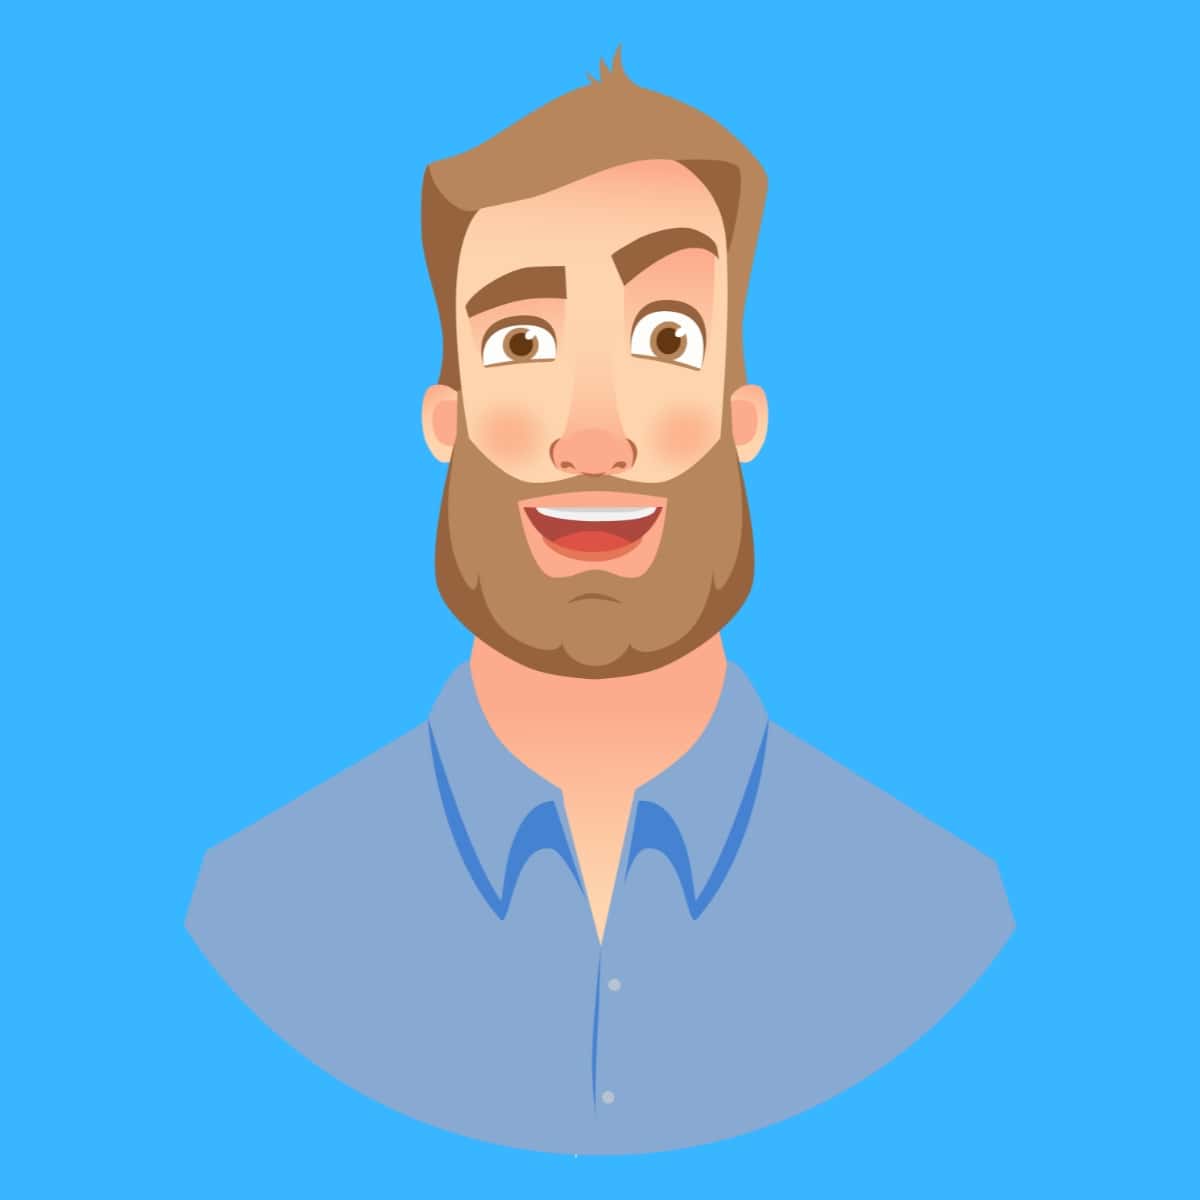 A cartoon graphic of a man with a full beard on a blue background.